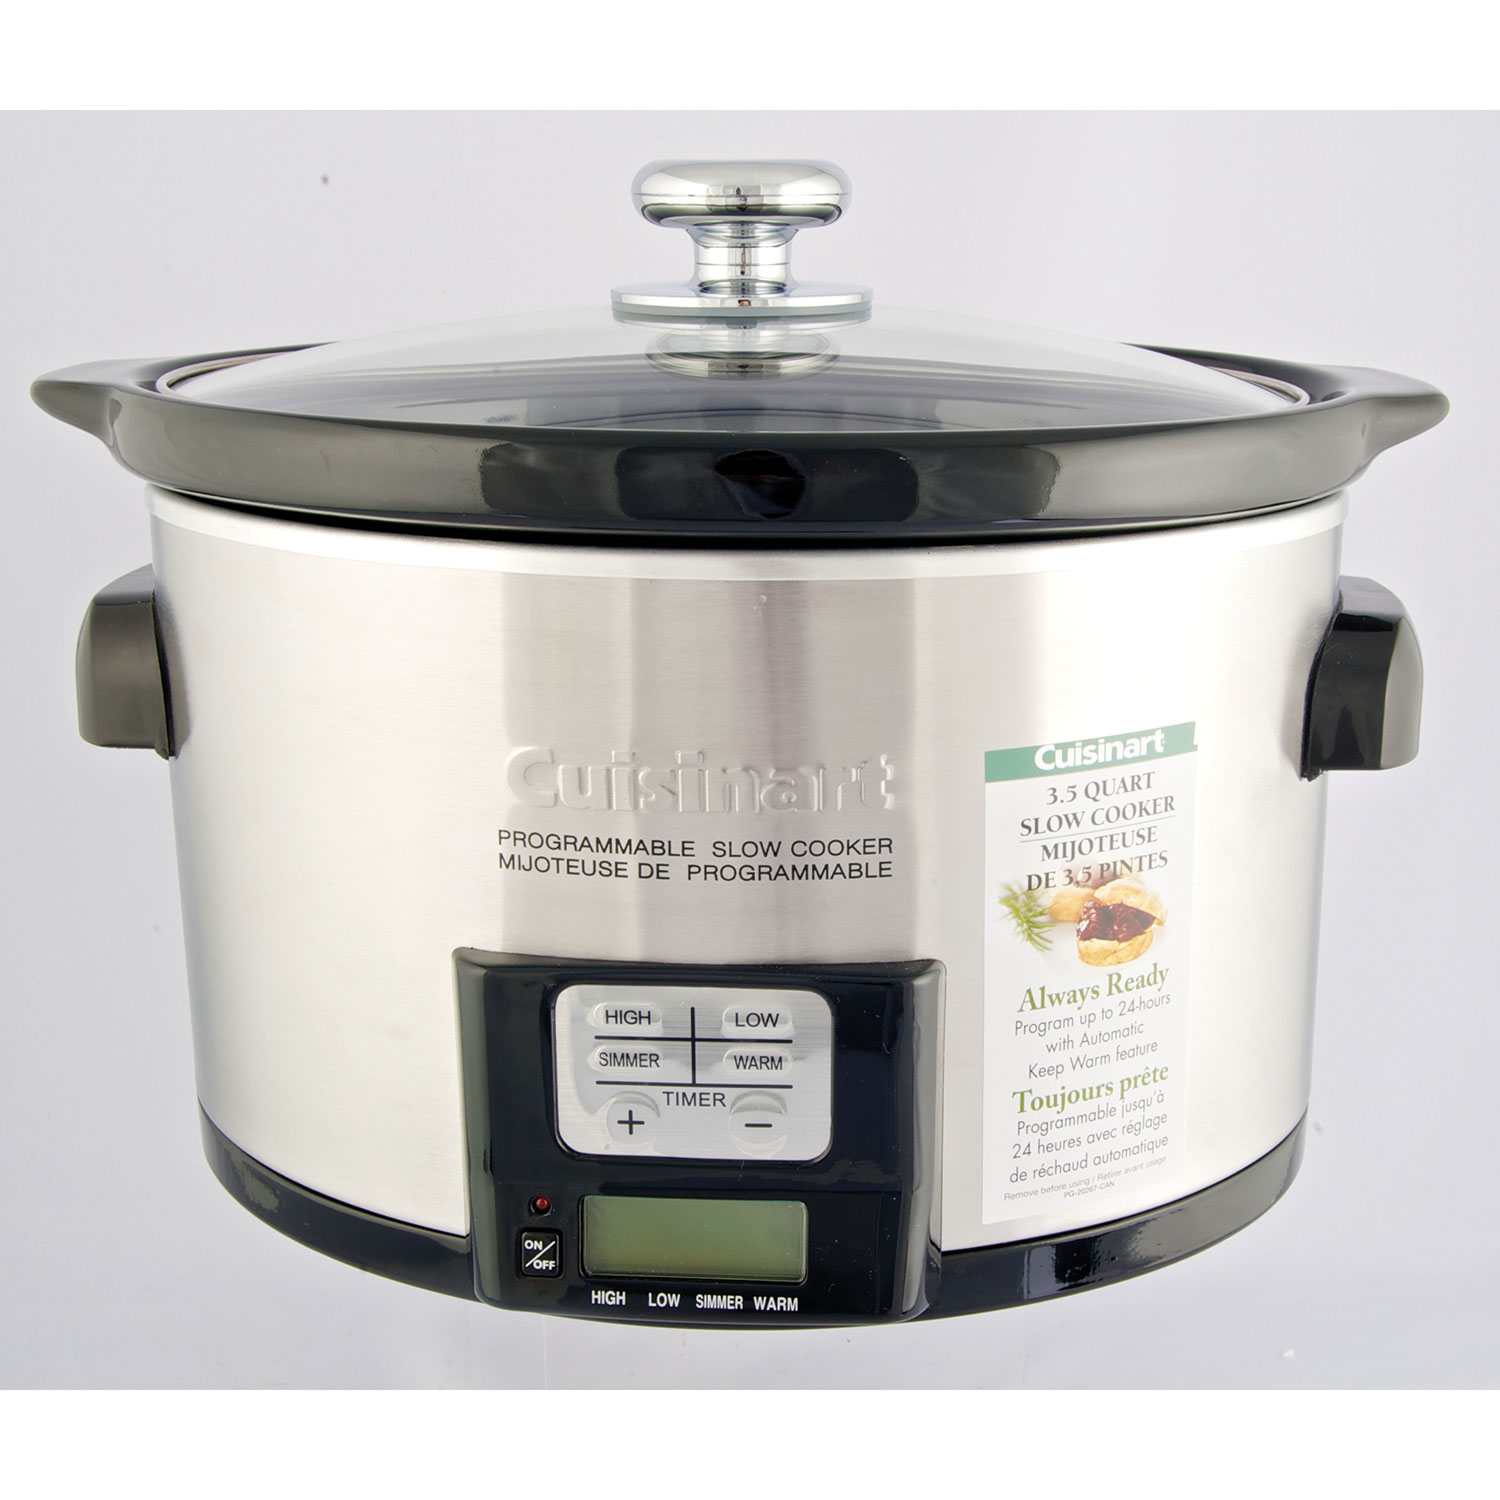 How does a Cuisinart slow cooker work?